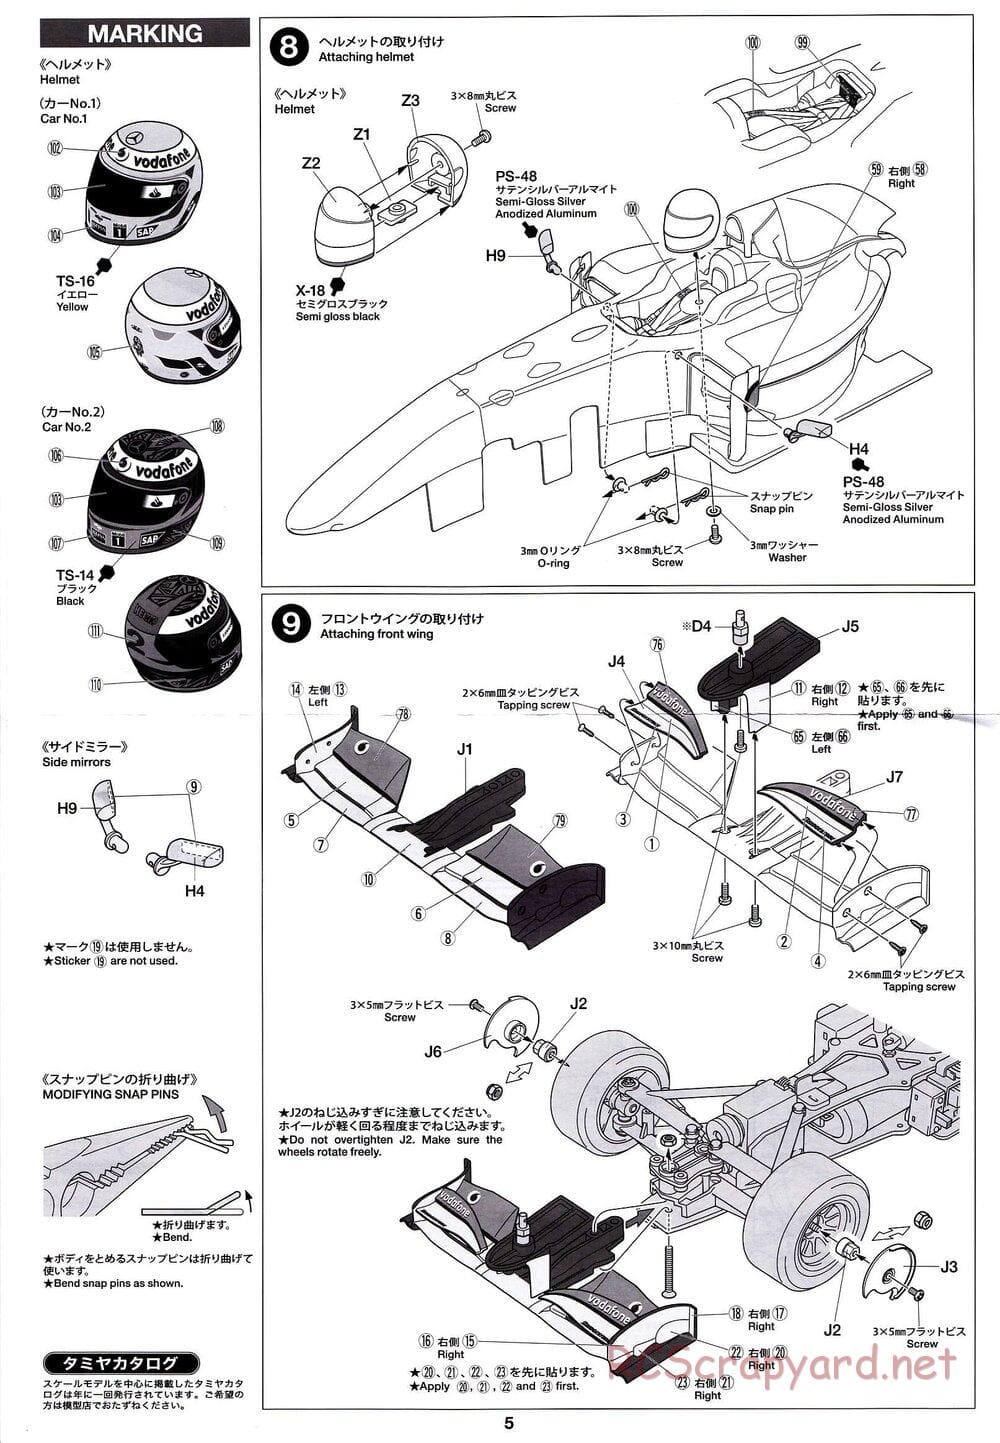 Tamiya - Vodafone McLaren Mercedes MP4-24 - F104 Chassis - Body Manual - Page 5